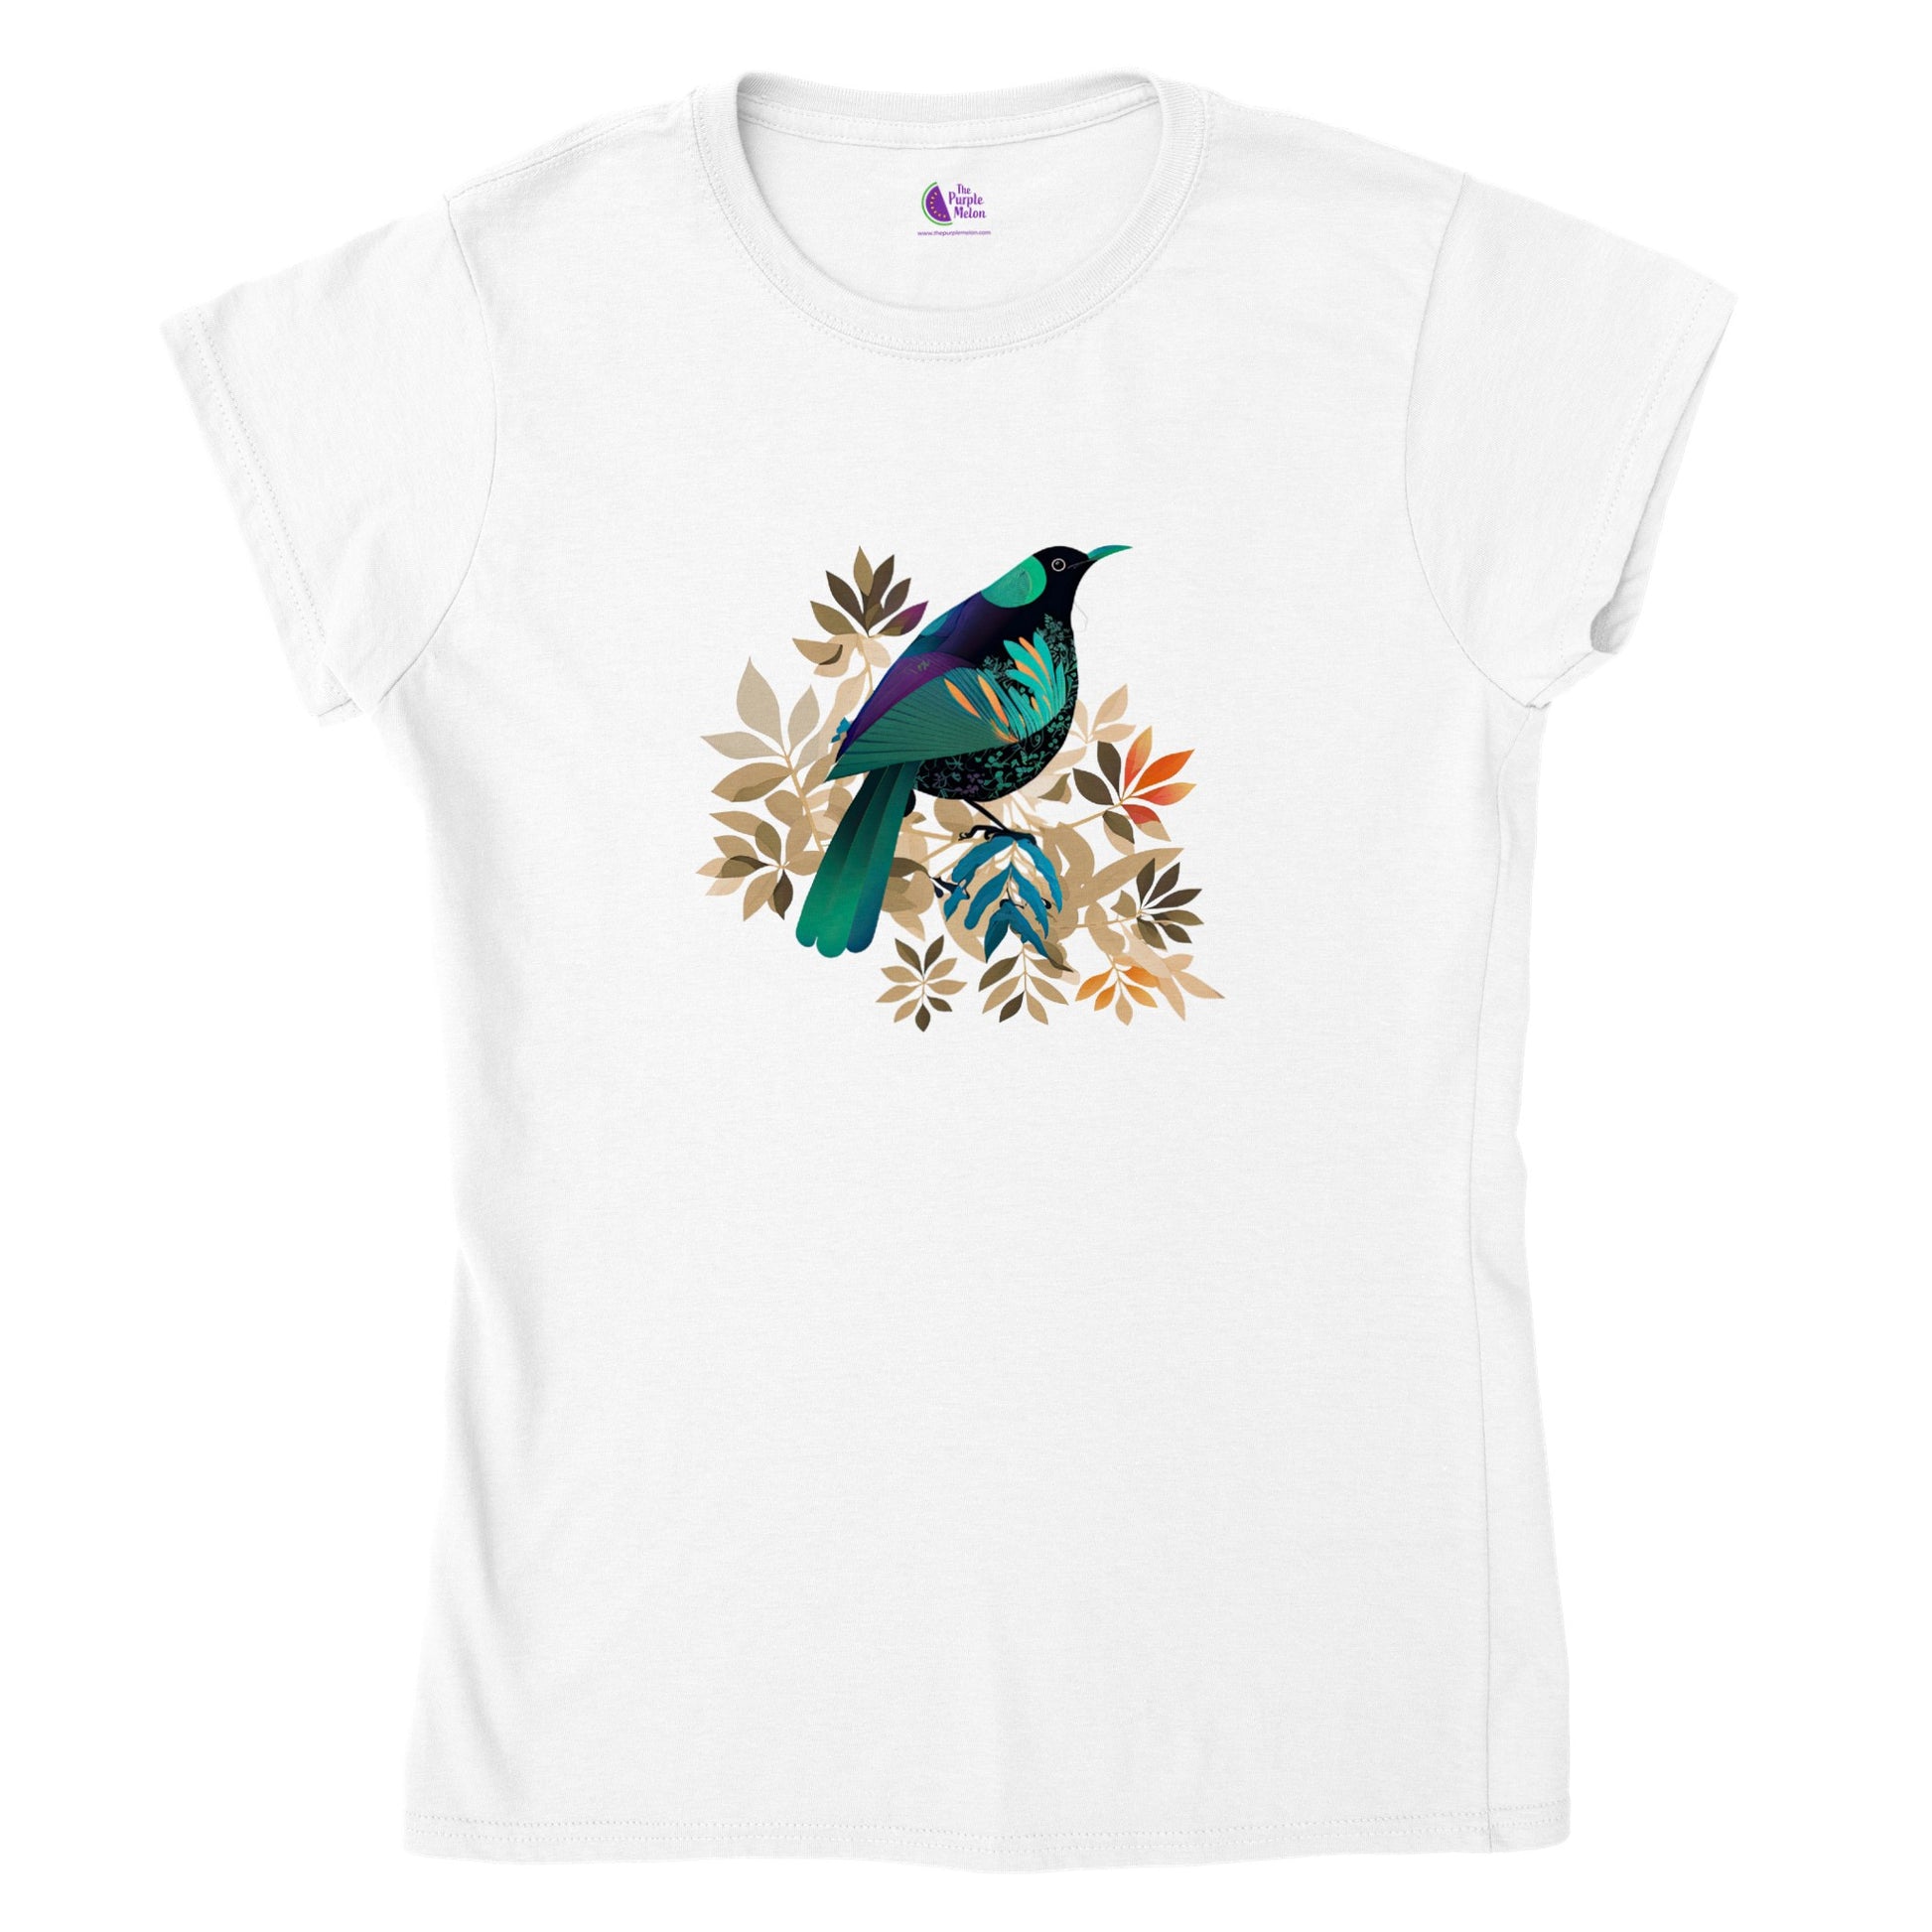 White t-shirt with a contemporary new zealand tui bird print